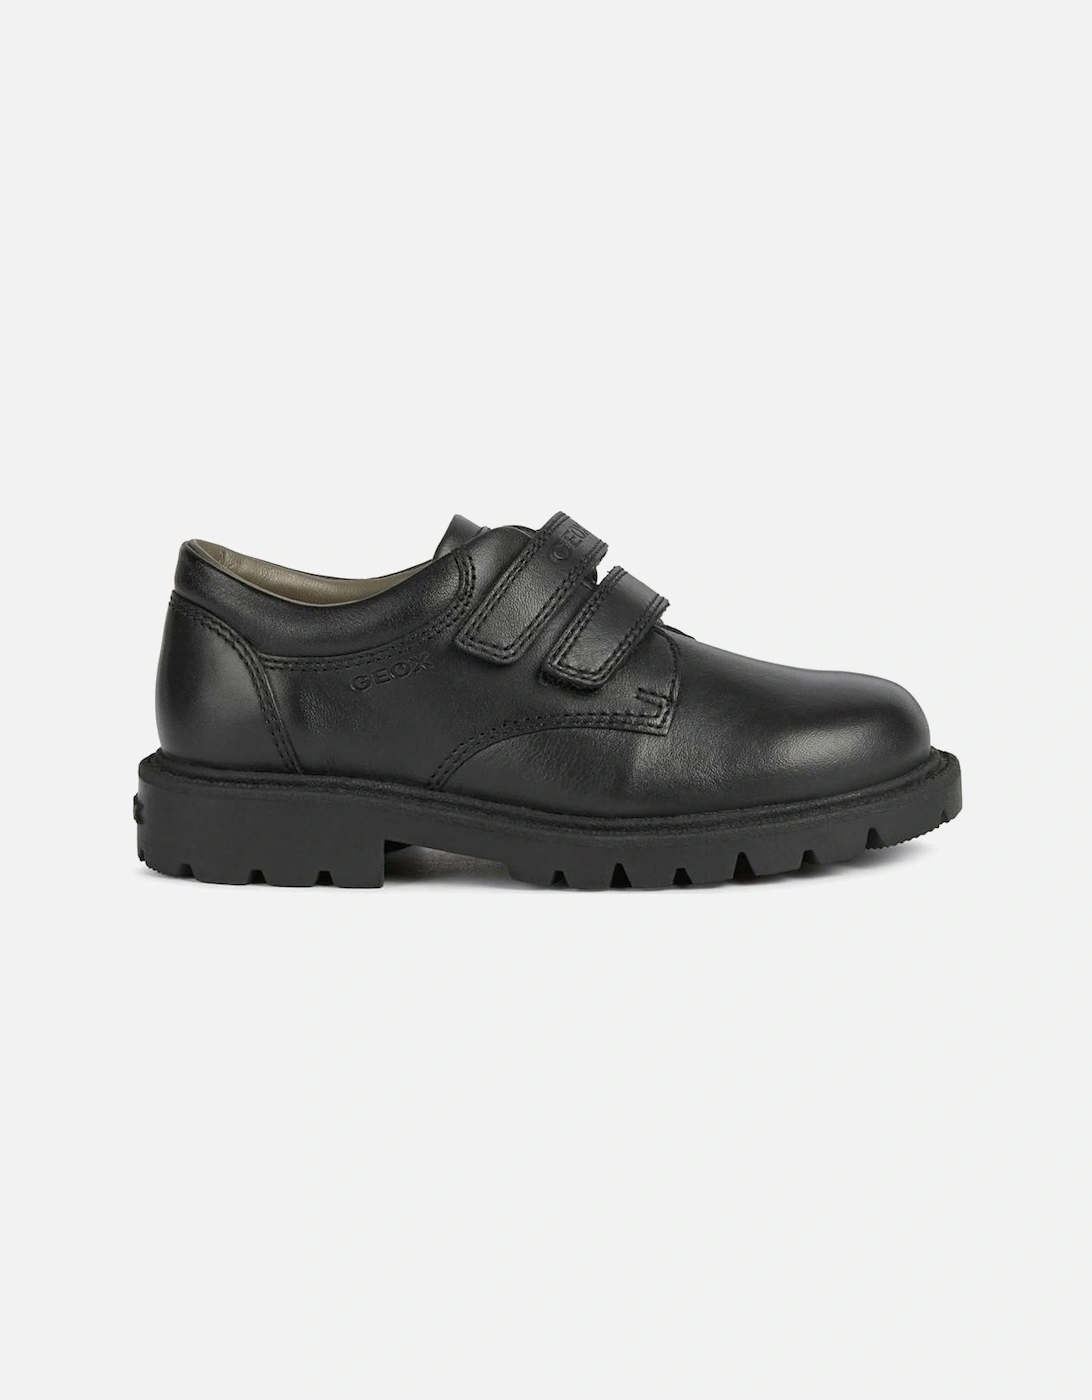 Boys Shaylax Double Row Leather School Shoes